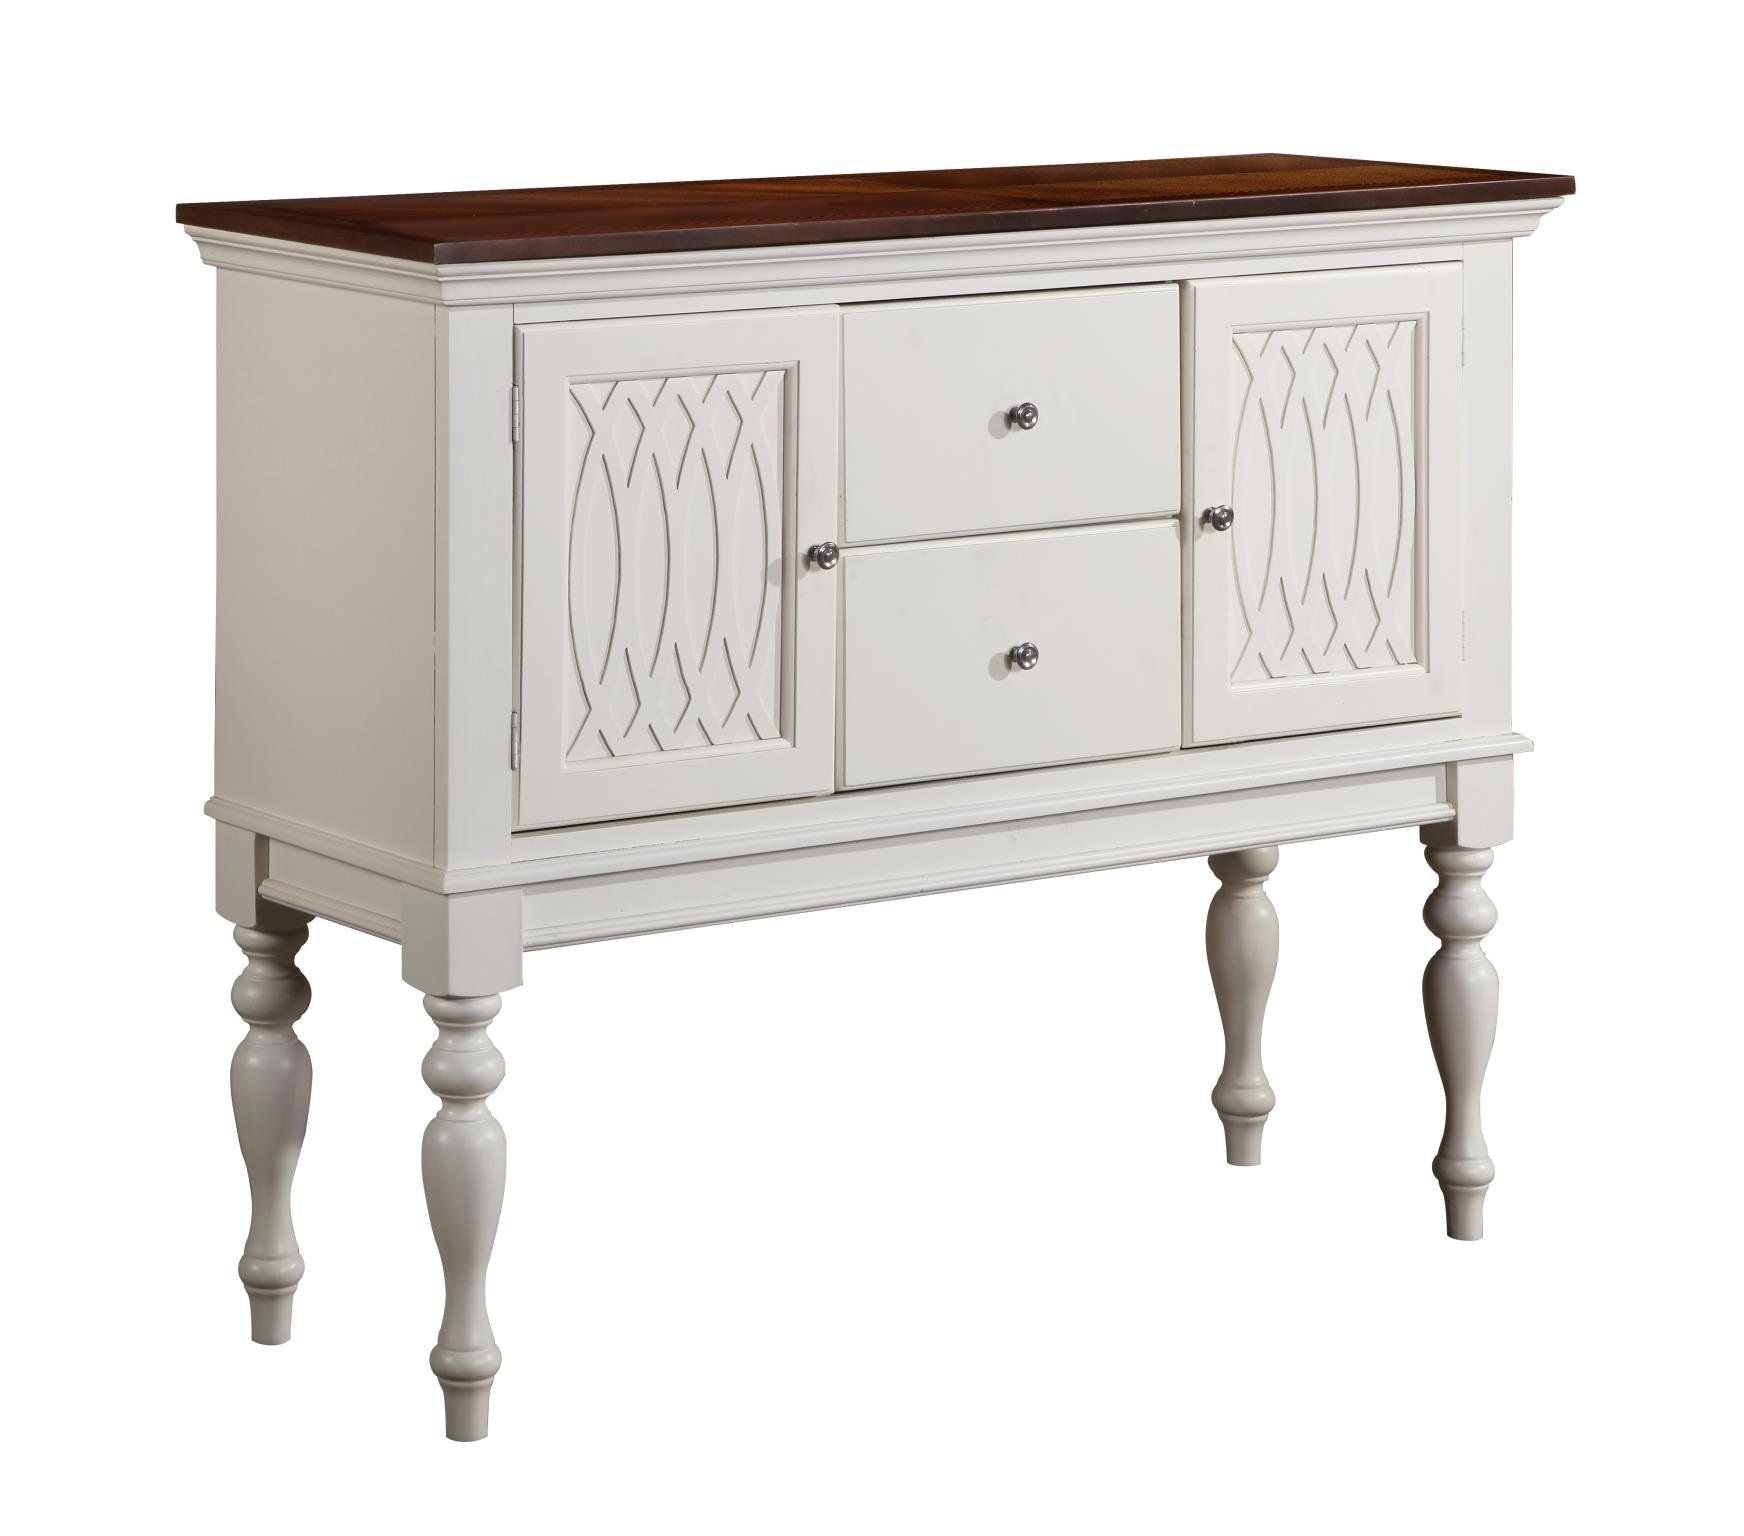 Hillenbrand Upholstered Buffet Table Intended For 2018 Amityville Wood Sideboards (View 13 of 20)